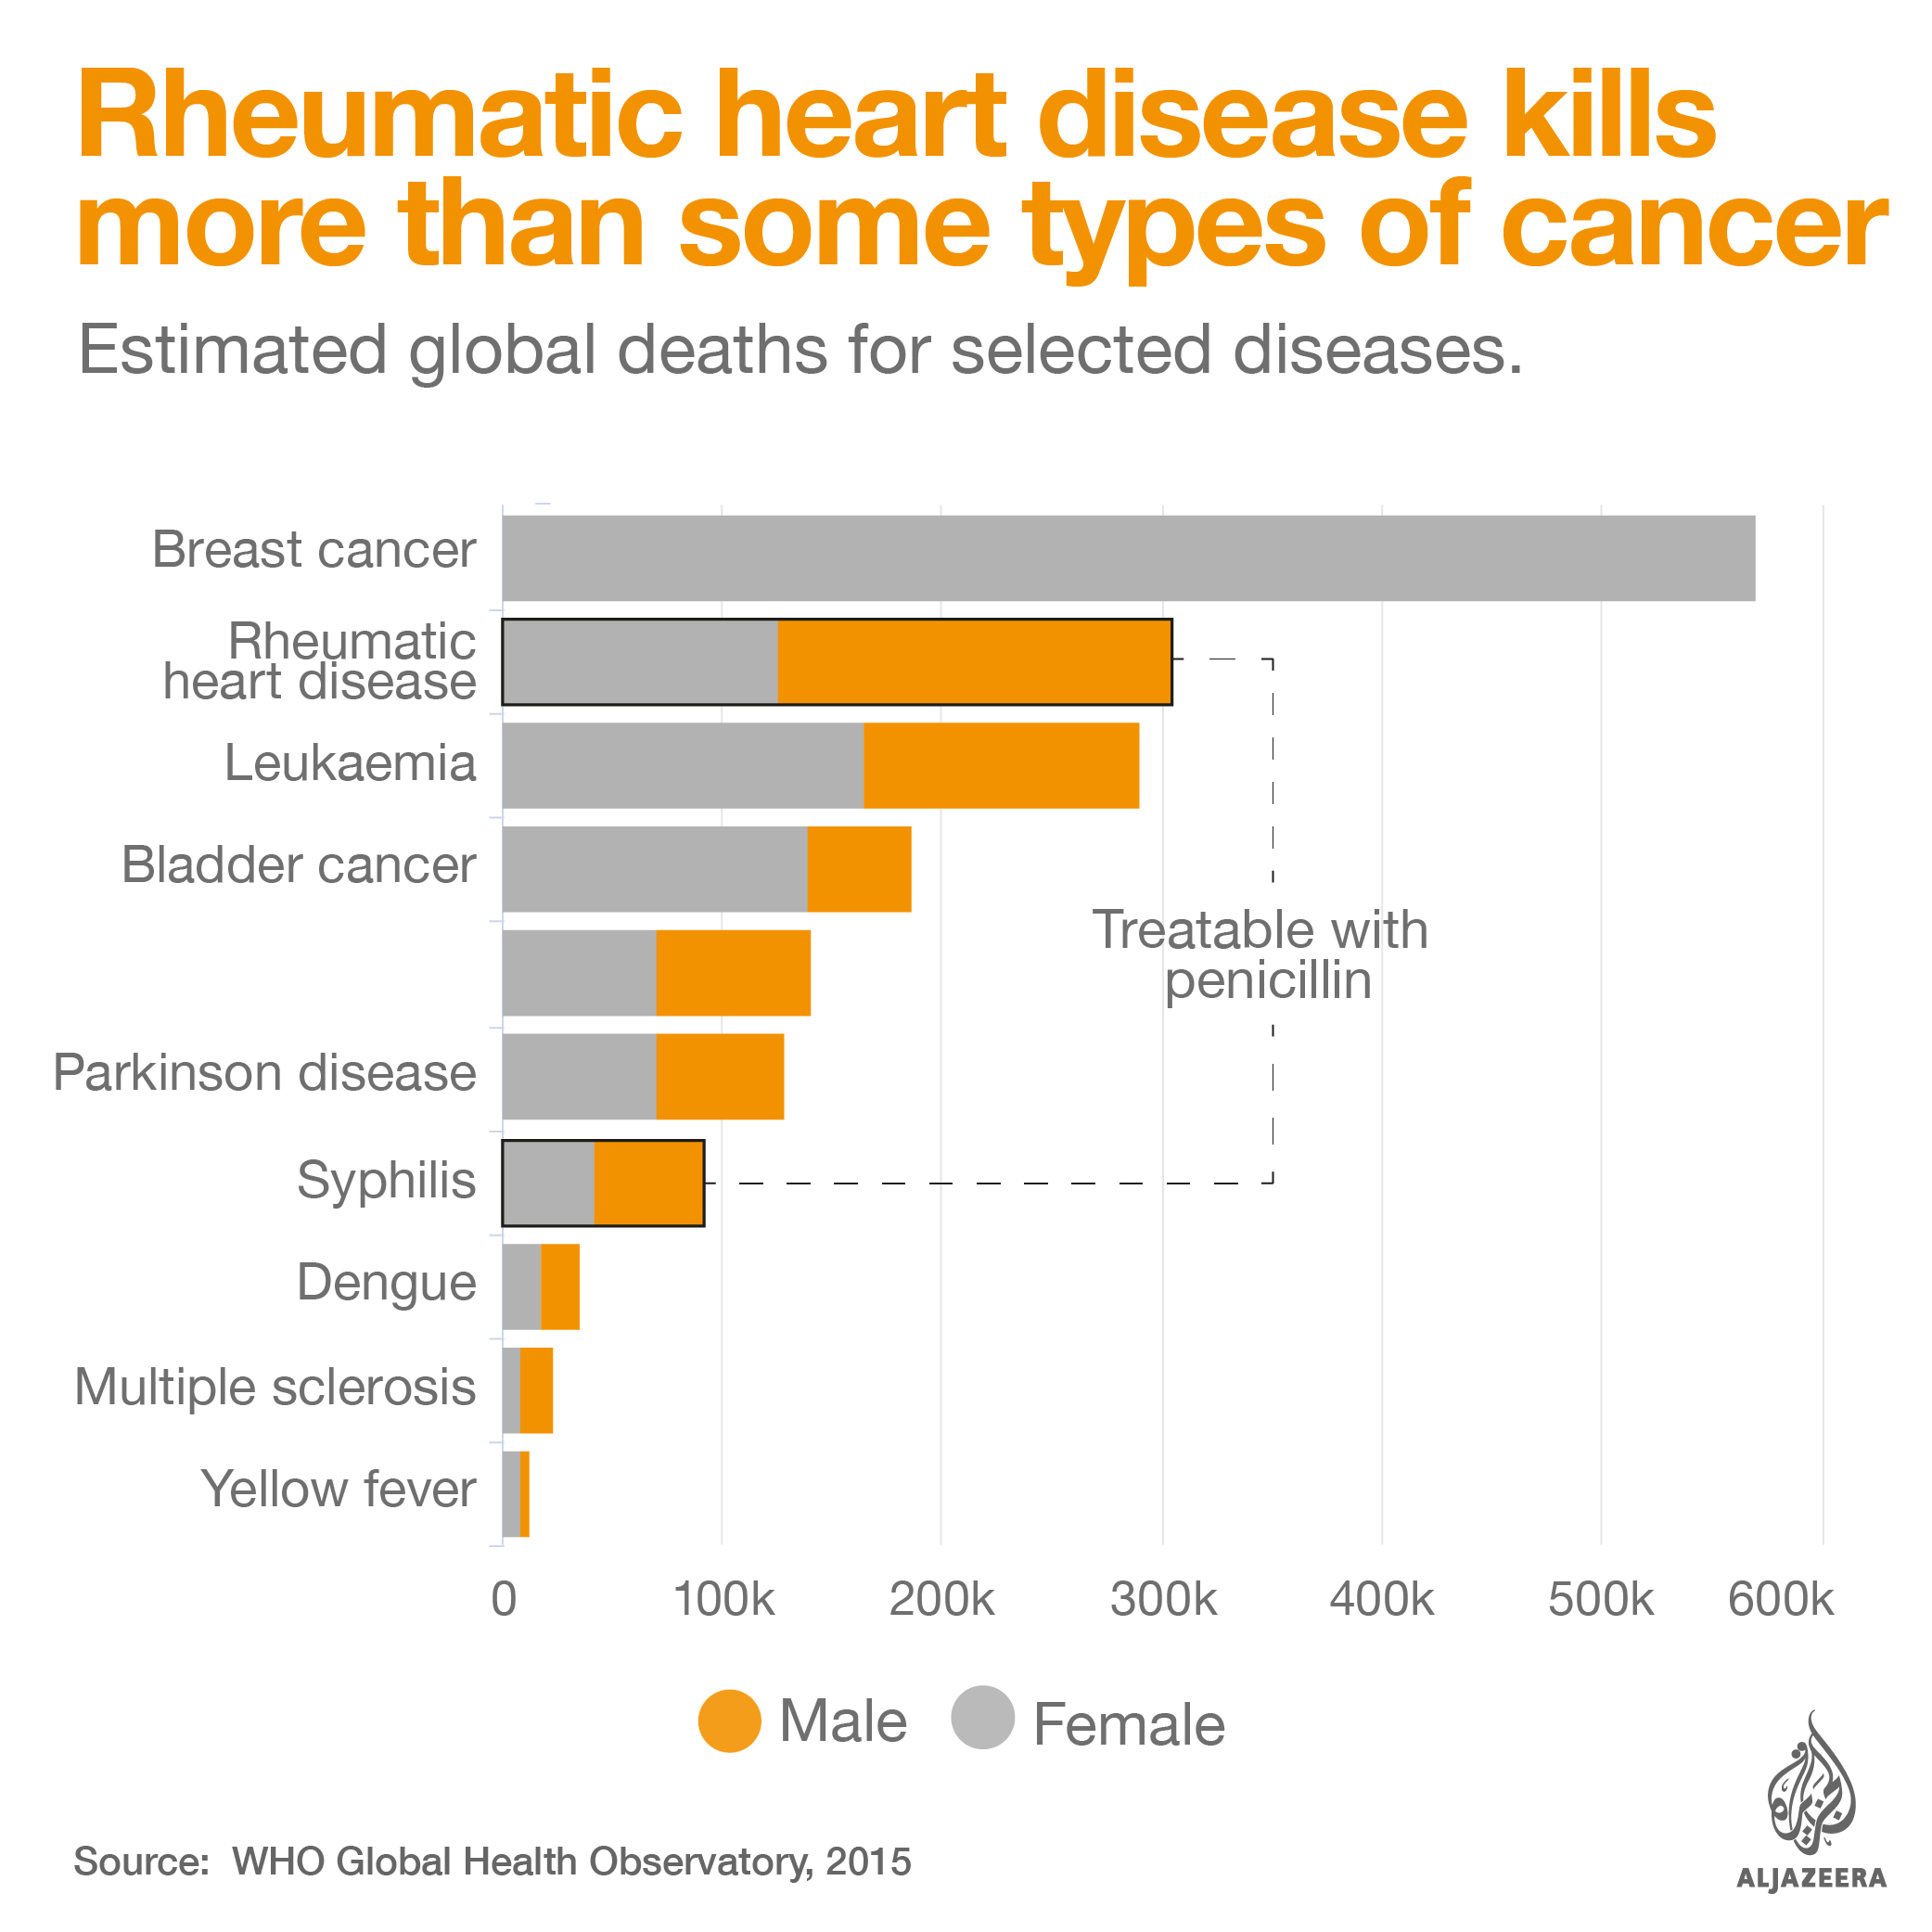 global deaths for selected diseases